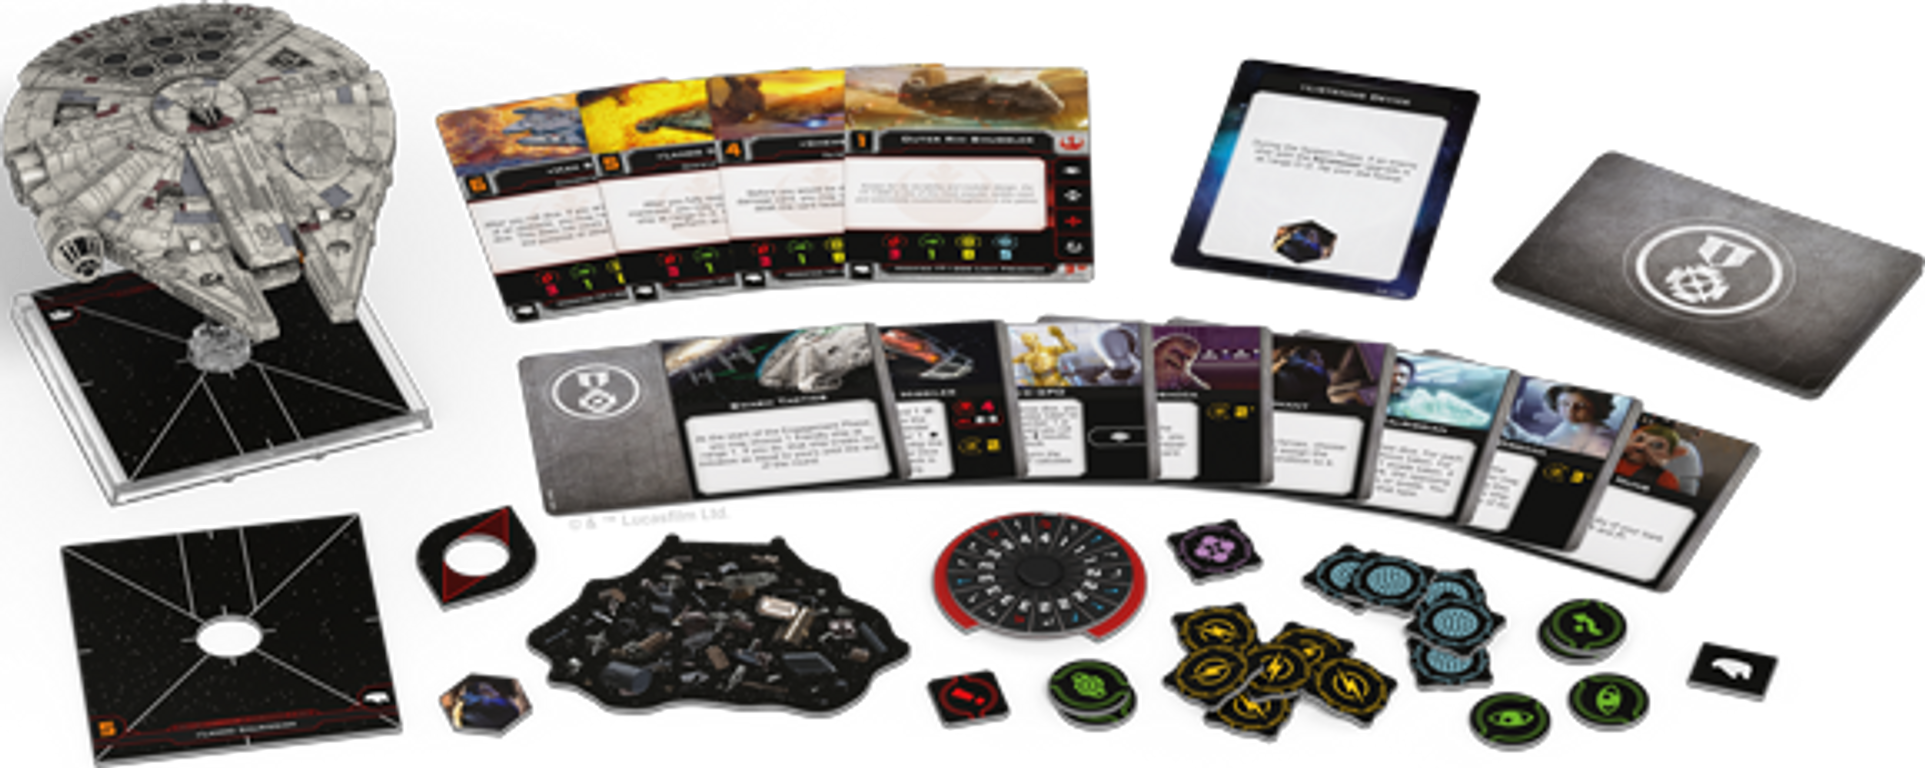 Star Wars: X-Wing (Second Edition) – Millennium Falcon Expansion Pack components